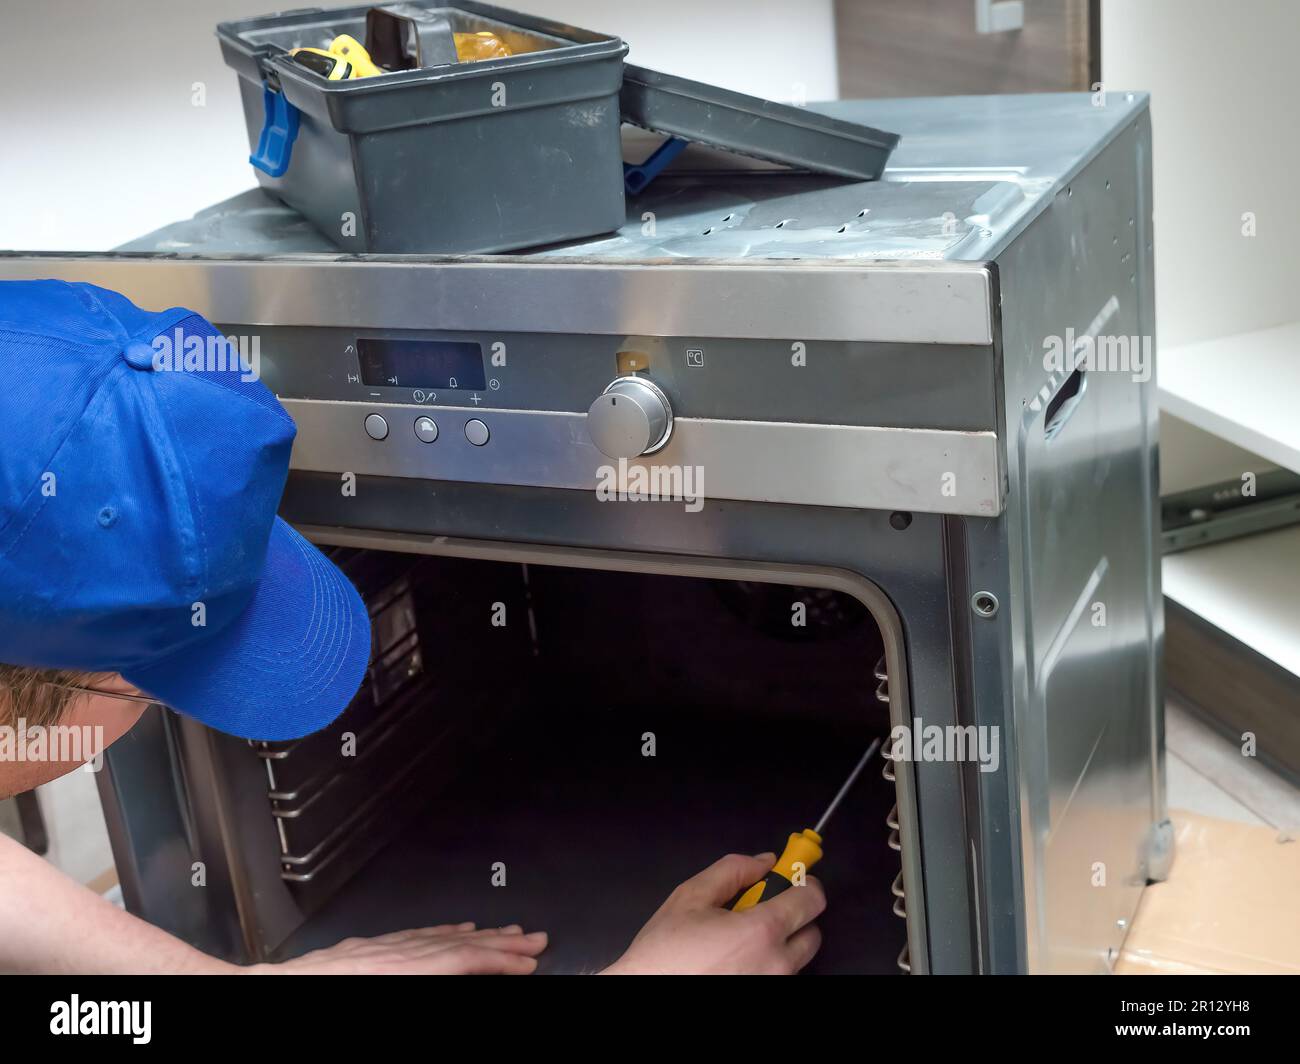 Serviceman dismantling parts of electric oven for easy repair access Stock Photo